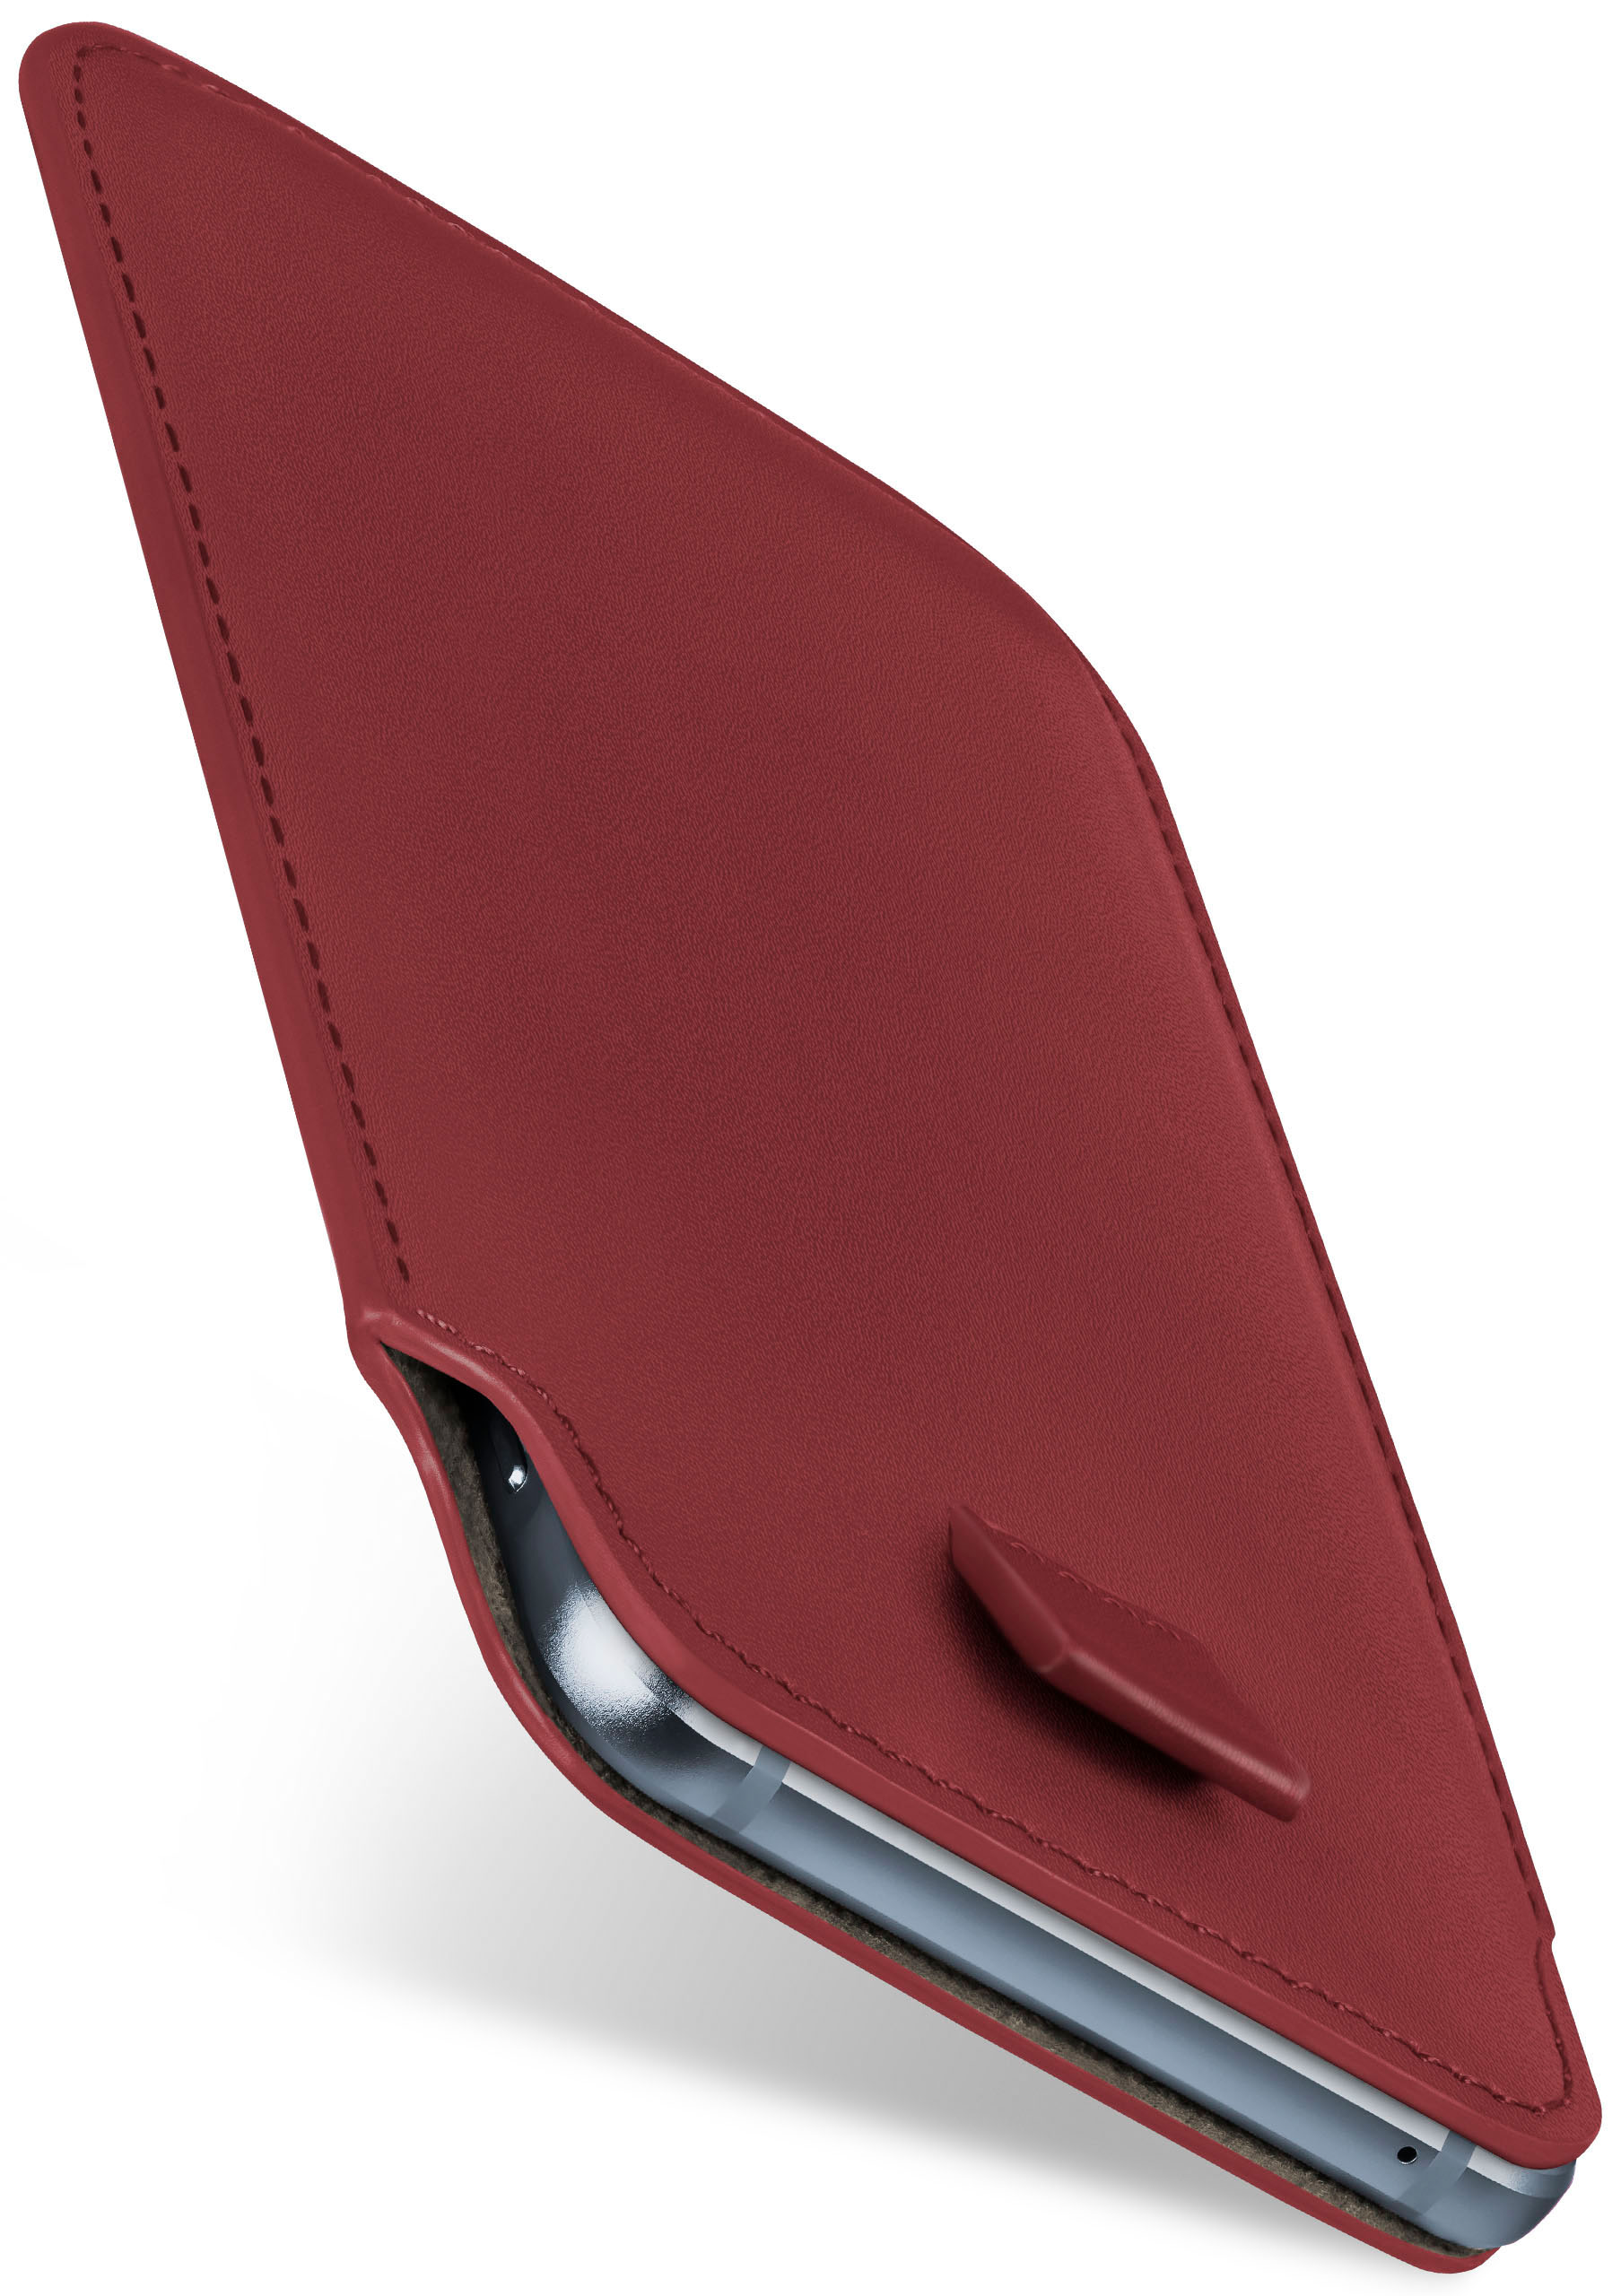 Full L2, Slide MOEX Cover, Case, Sony, Xperia Maroon-Red